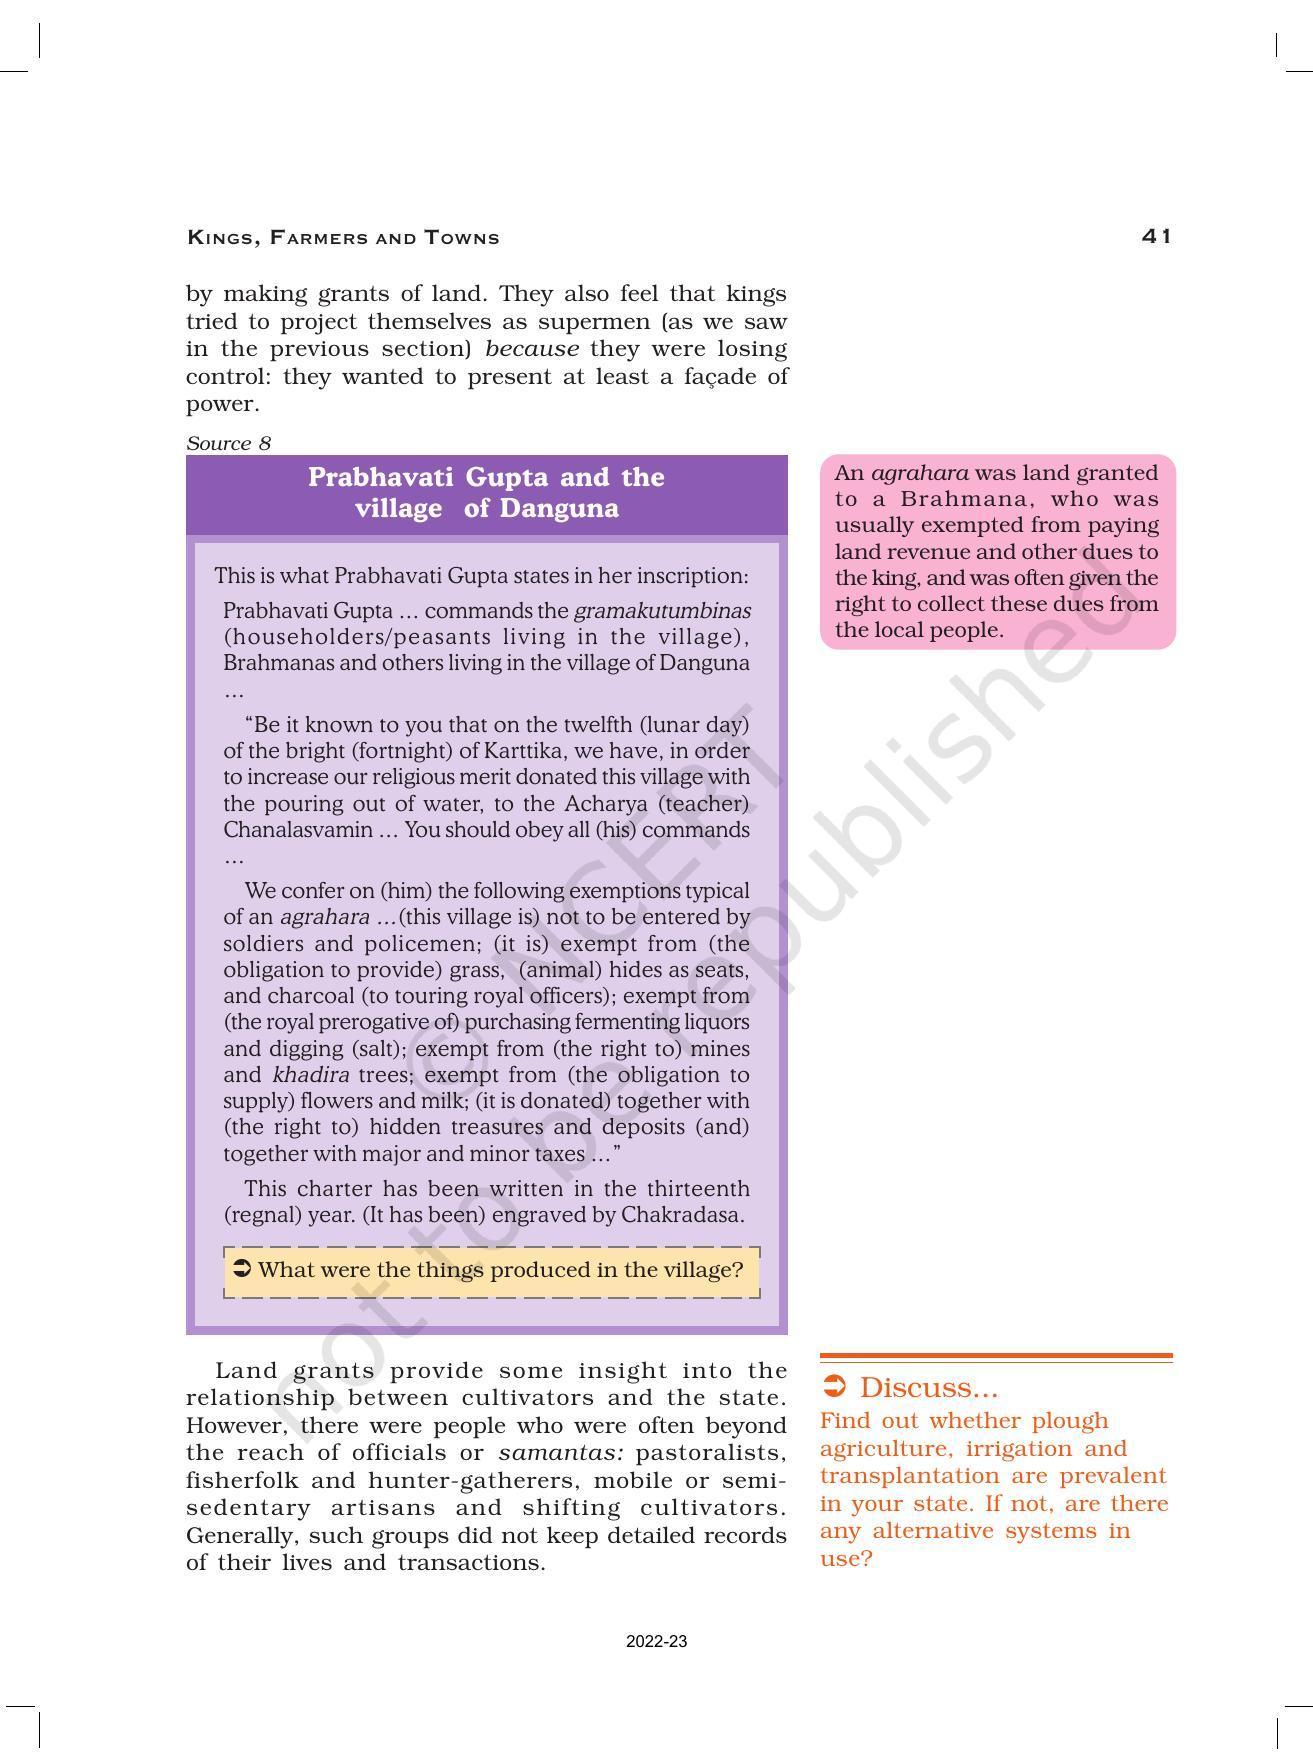 NCERT Book for Class 12 History (Part-1) Chapter 2 Kings, Farmers, and Towns - Page 14